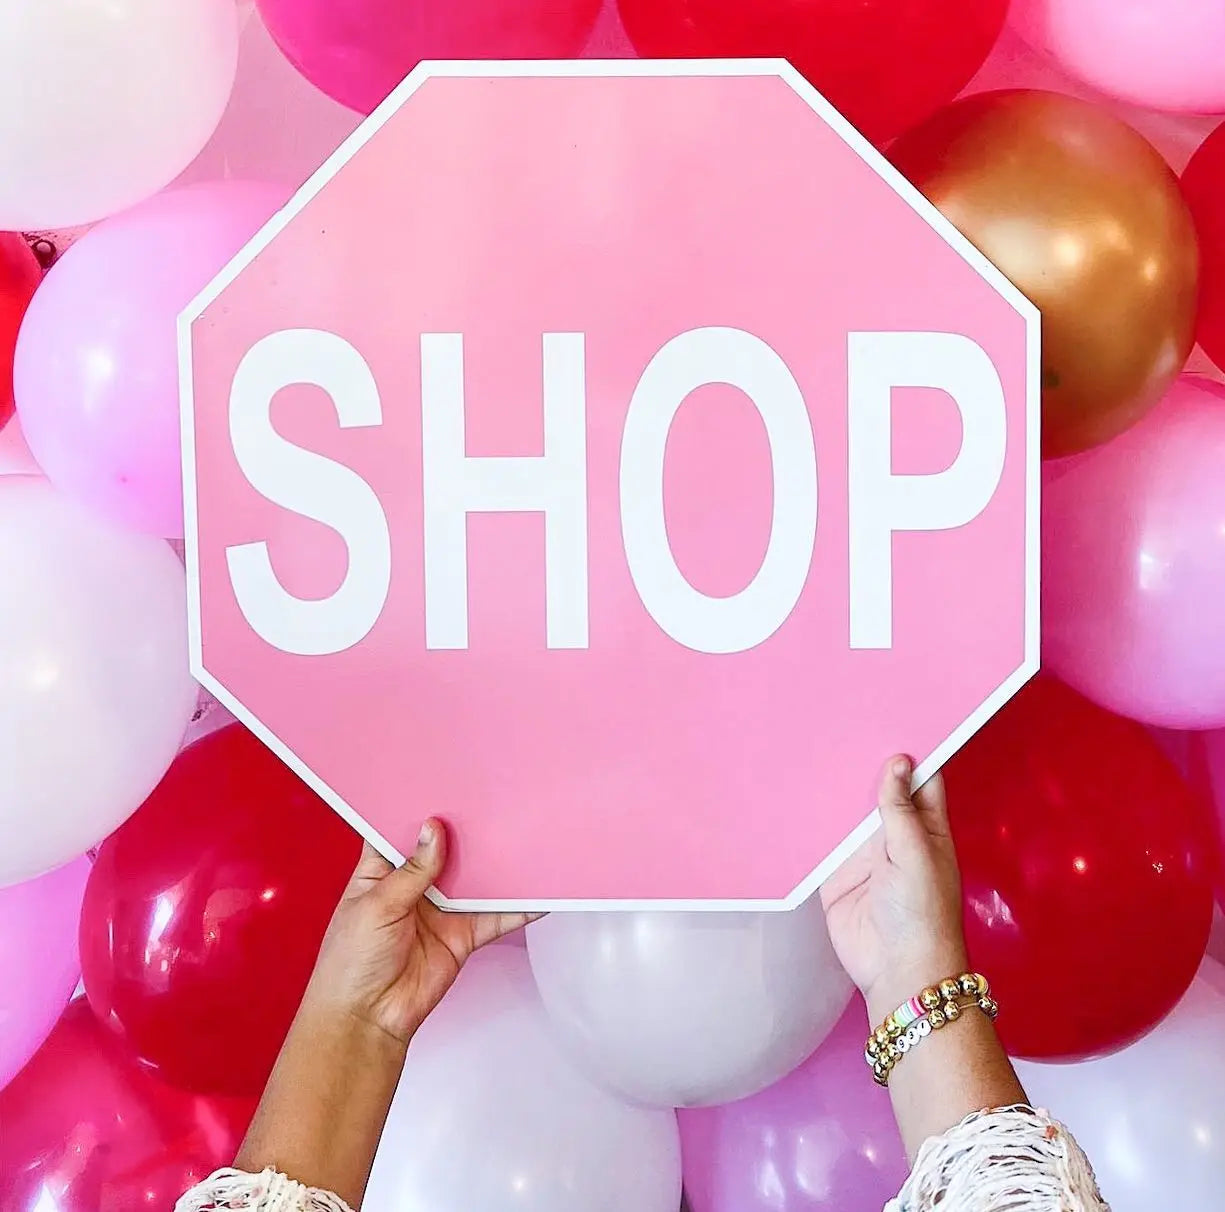 Pink shop stop sign being held in front of colorful ballons.